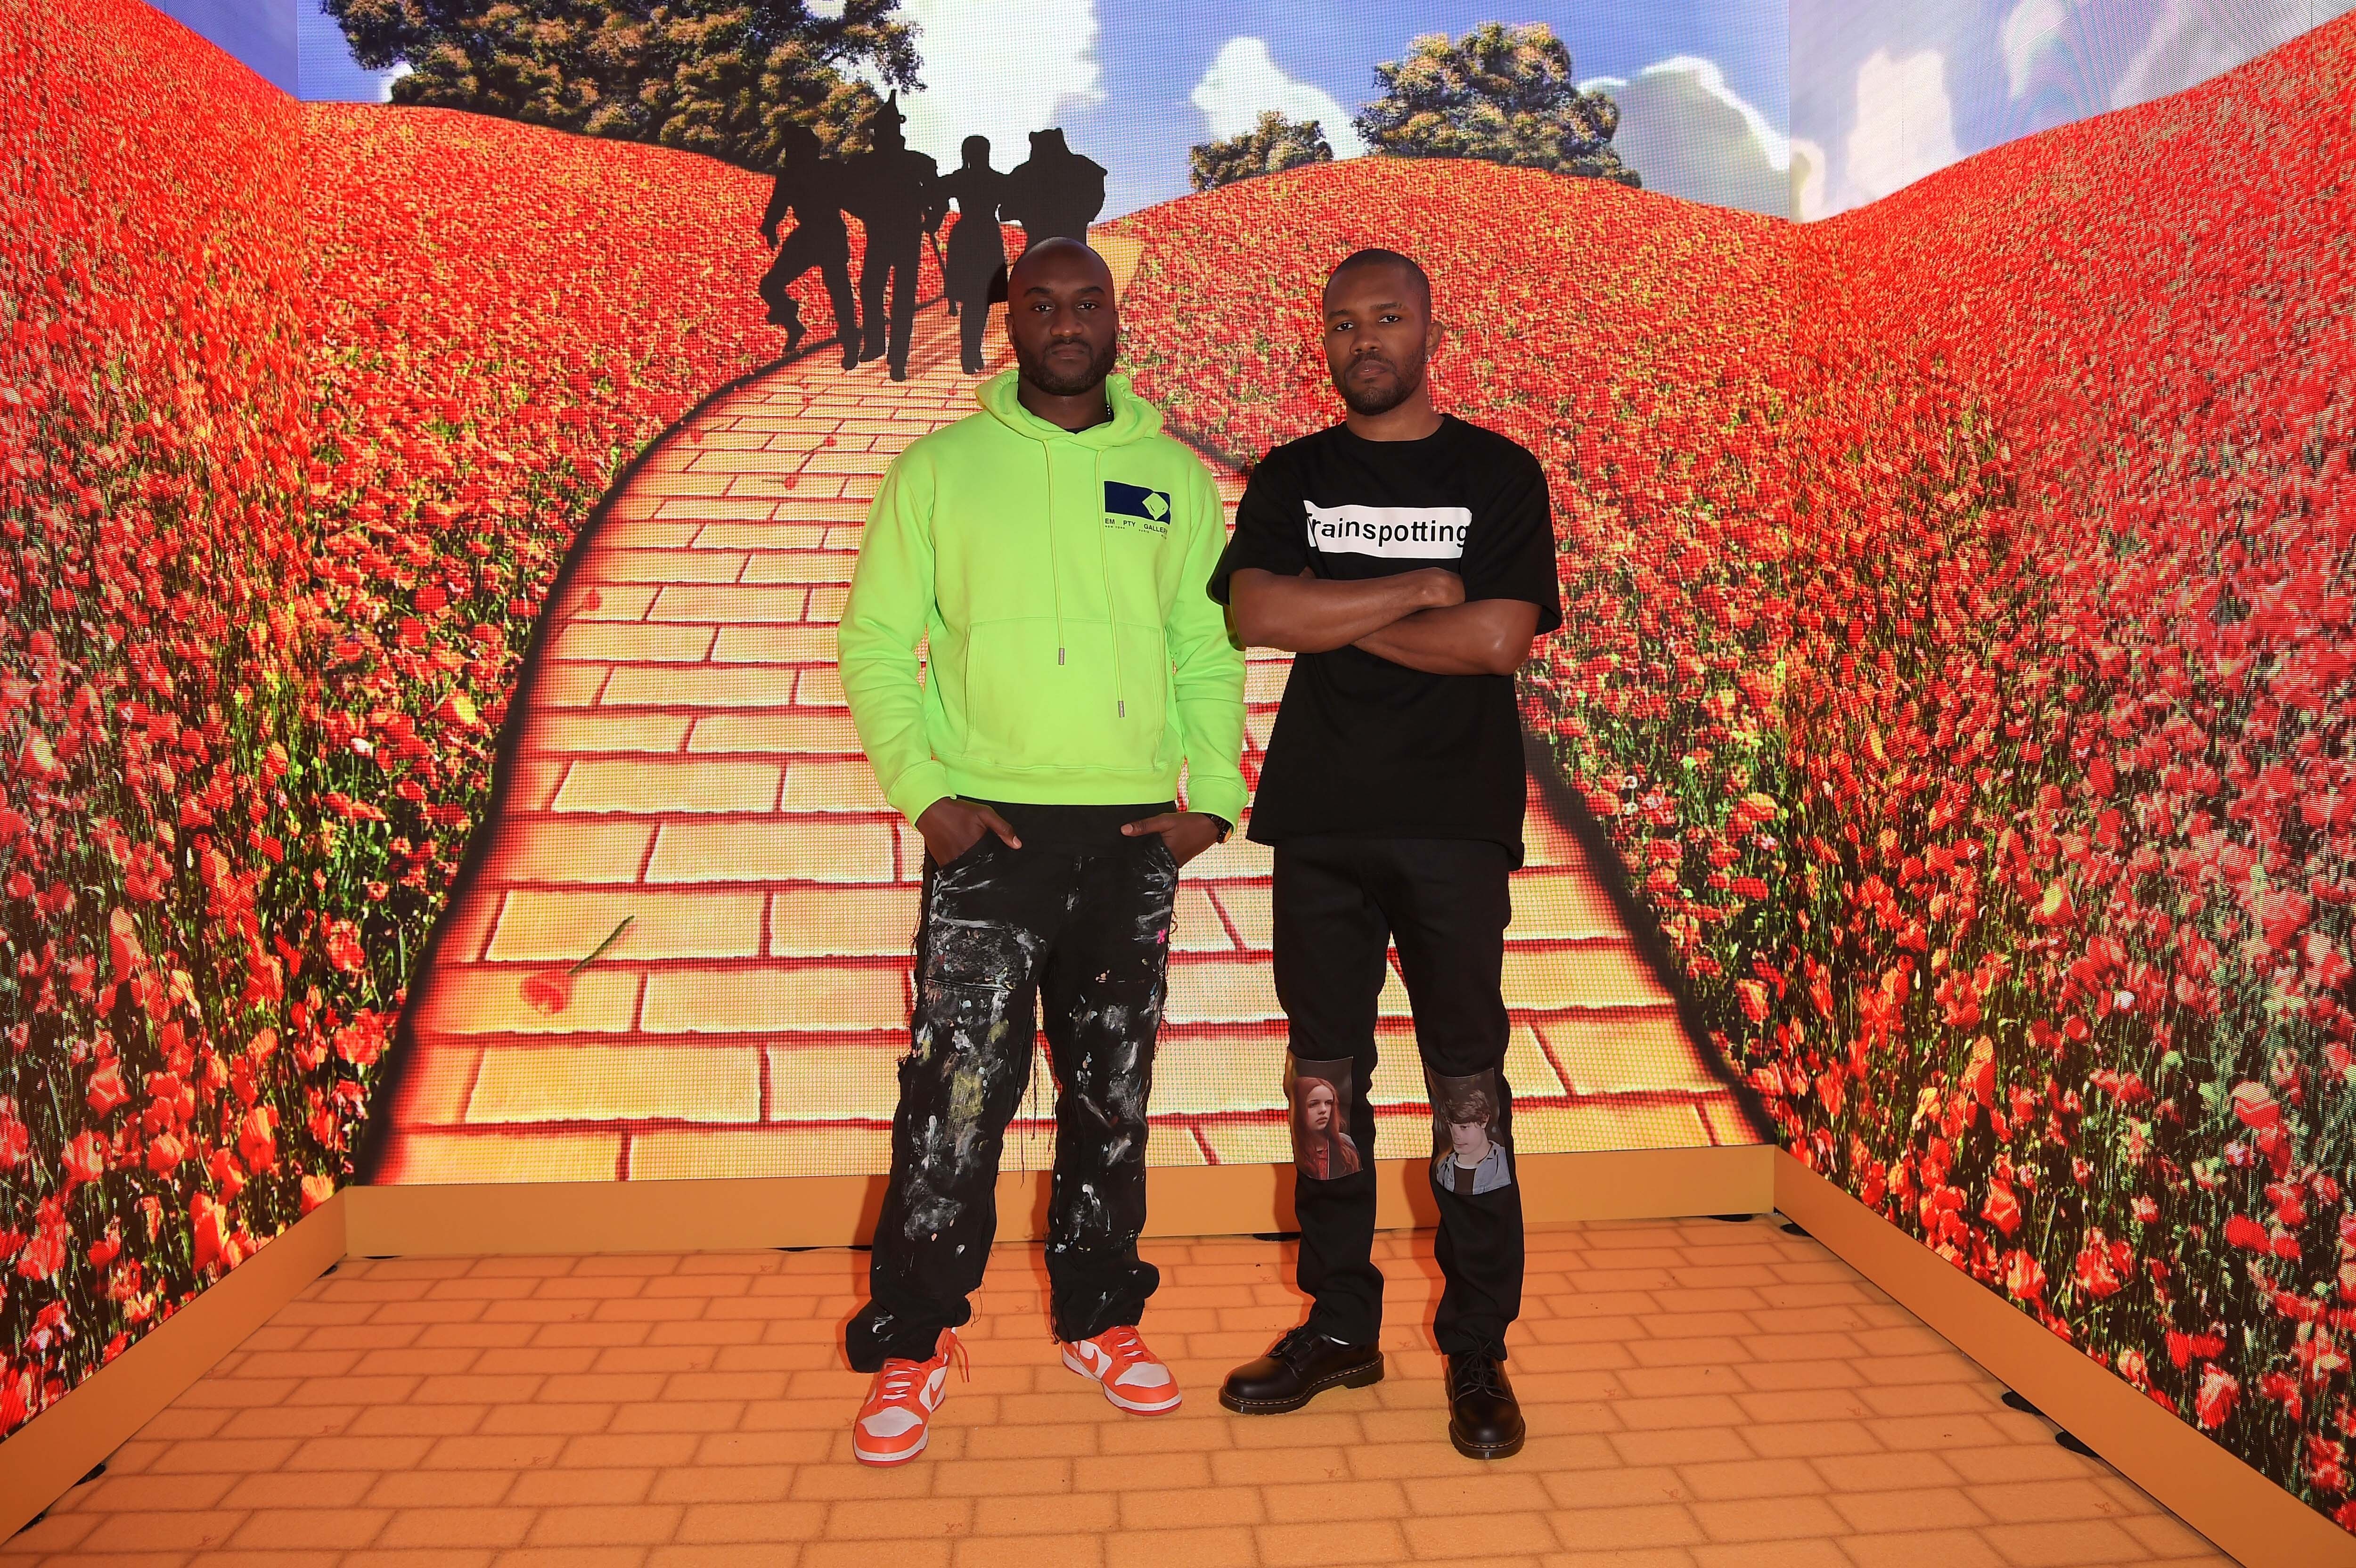 virgil abloh and Frank Ocean together at the launch of Louis Putton